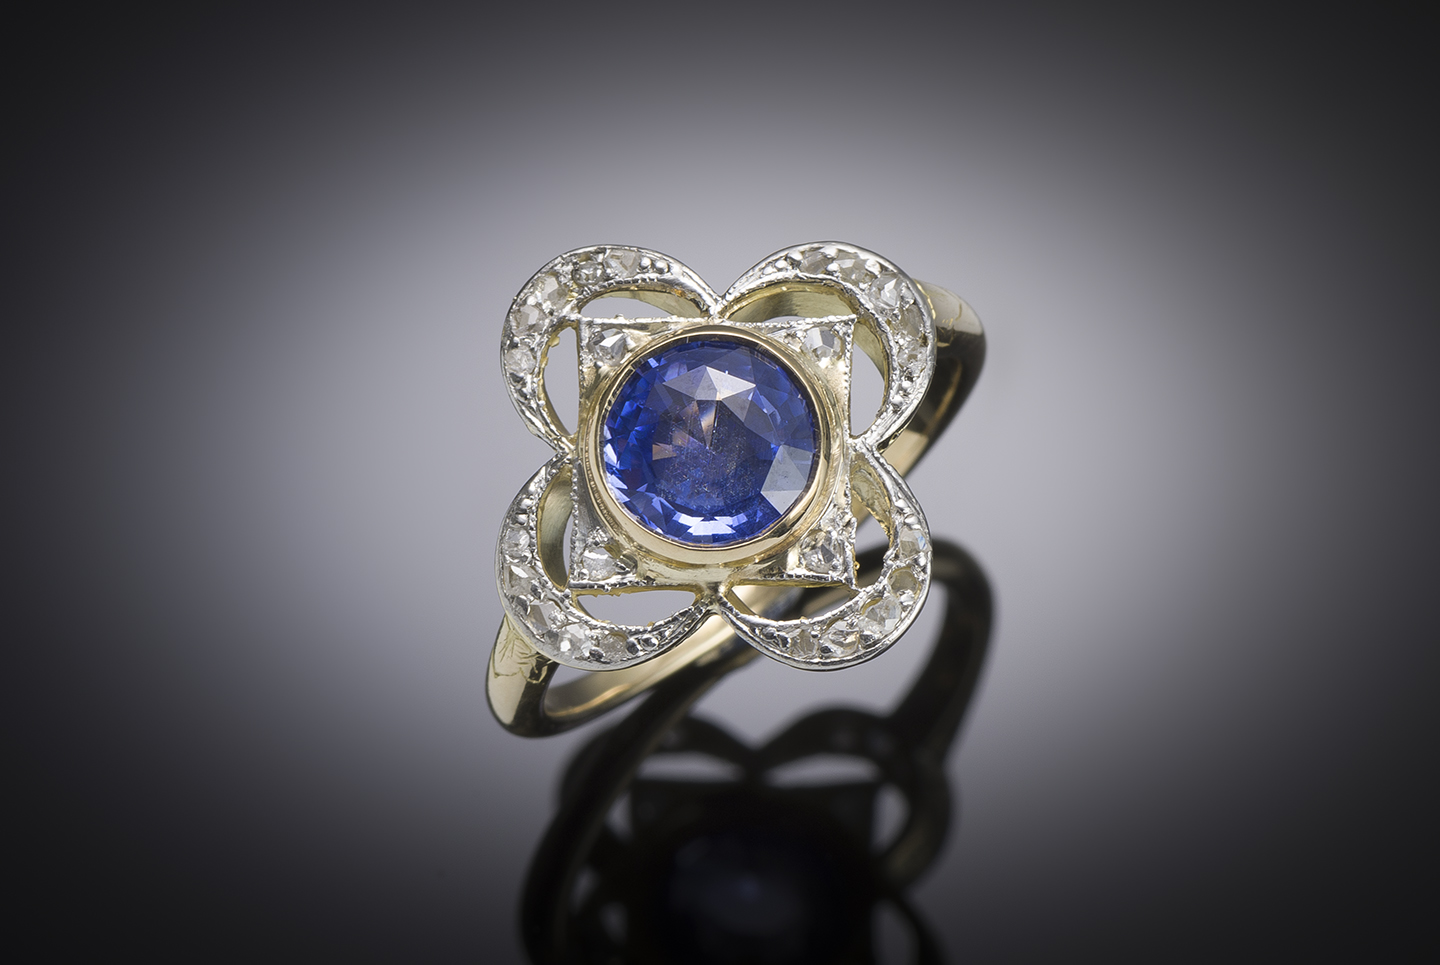 Early 20th century french ring with unheated sapphire (laboratory certificate) and diamonds-1